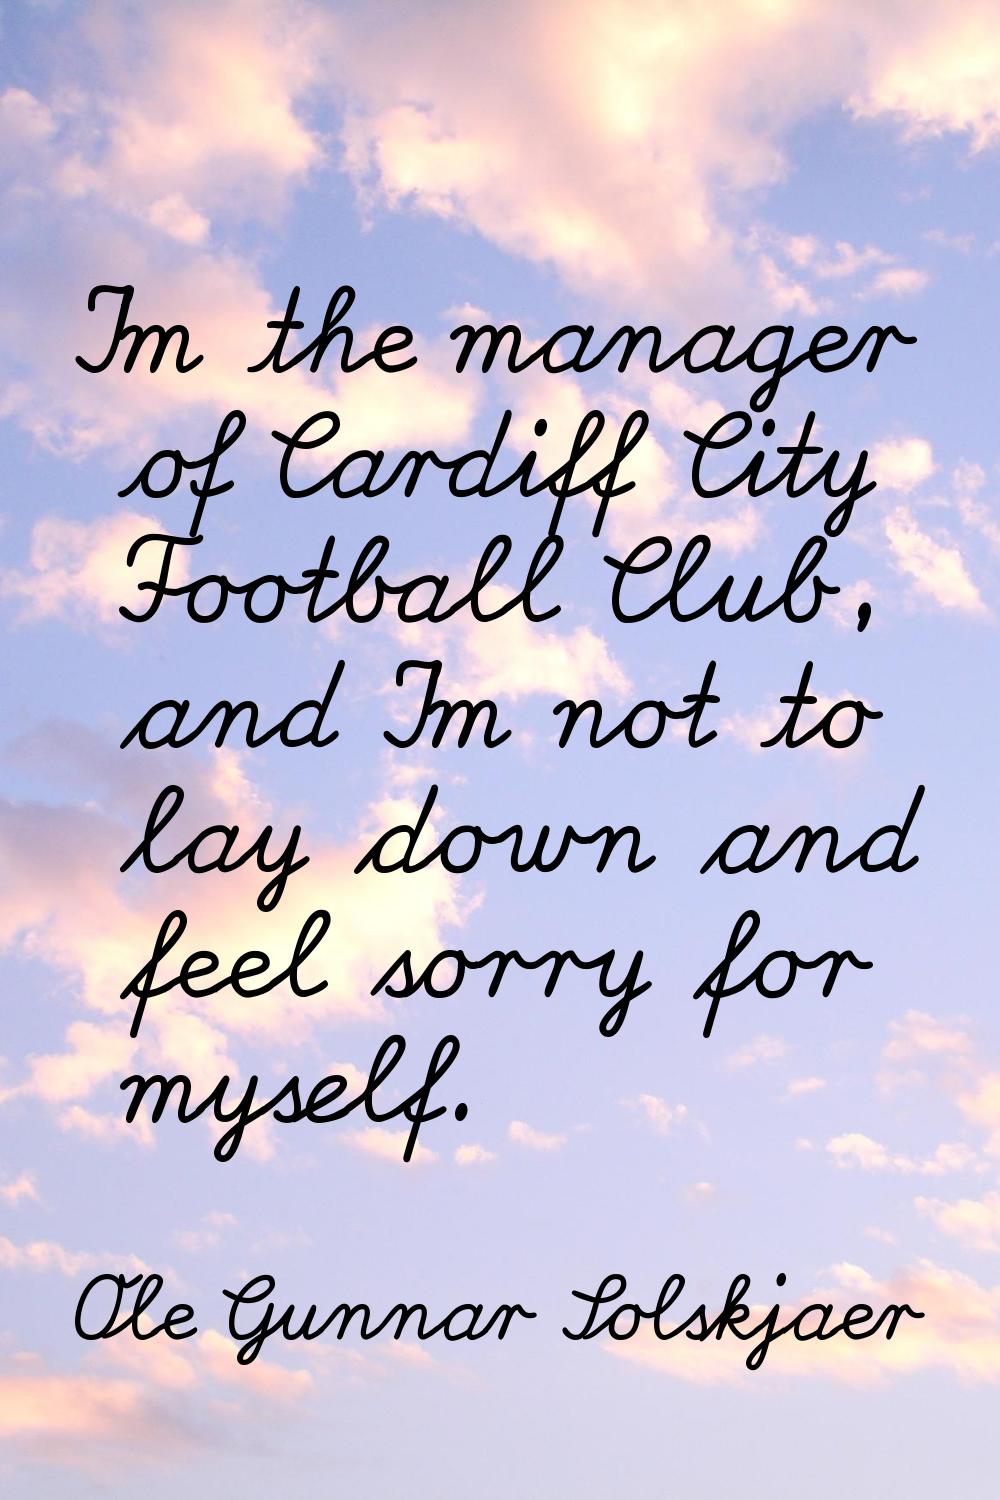 I'm the manager of Cardiff City Football Club, and I'm not to lay down and feel sorry for myself.